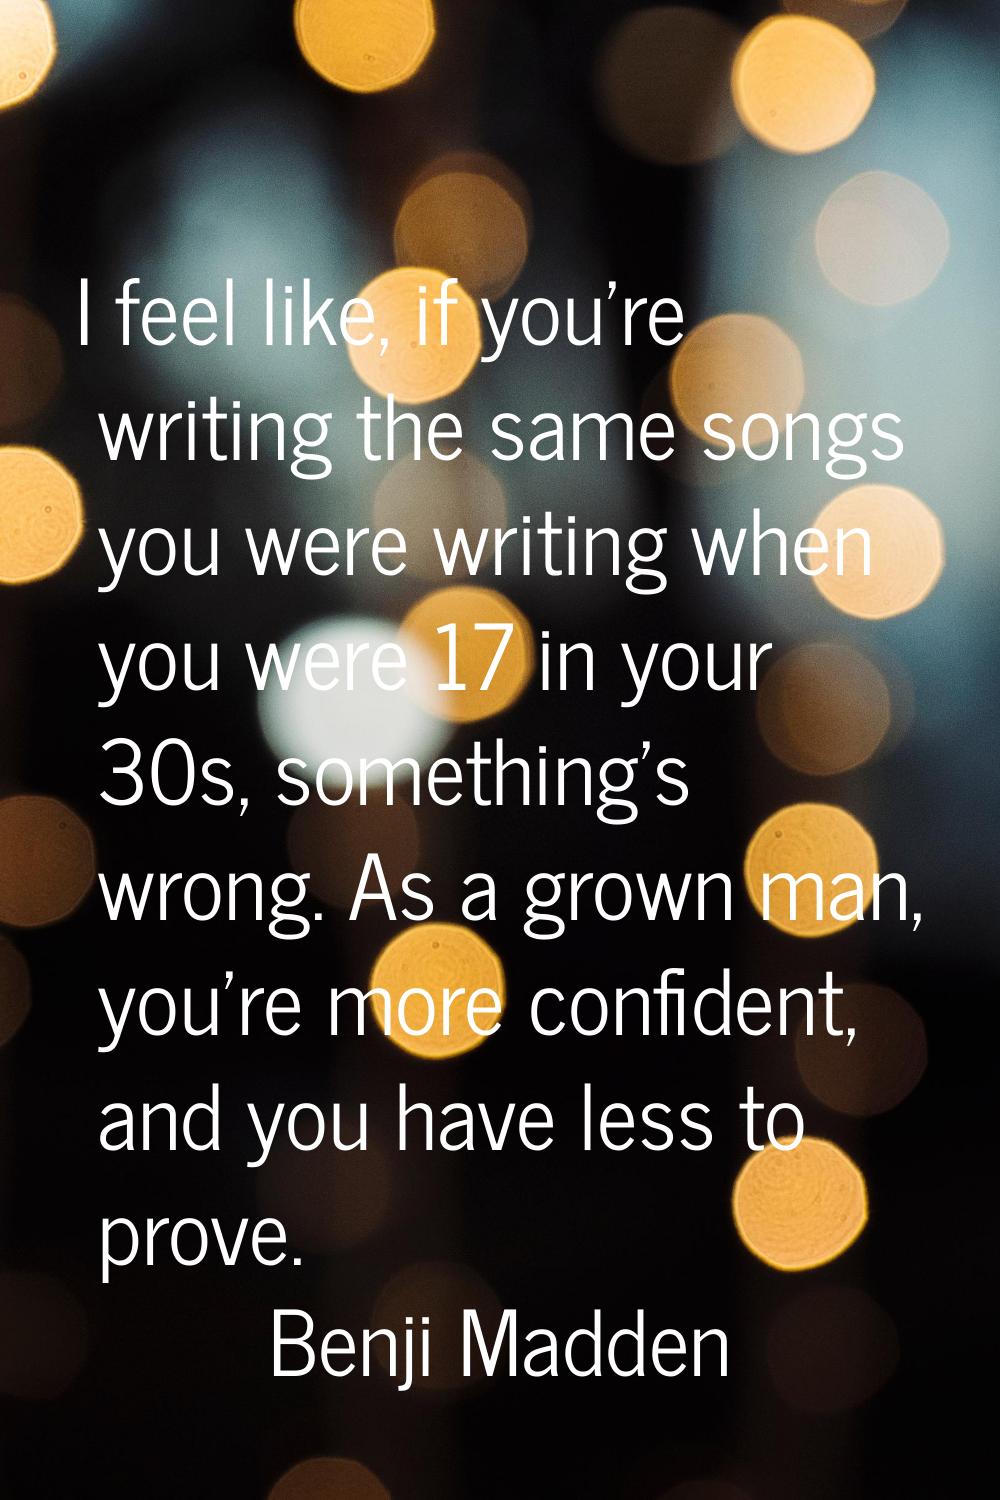 I feel like, if you're writing the same songs you were writing when you were 17 in your 30s, someth